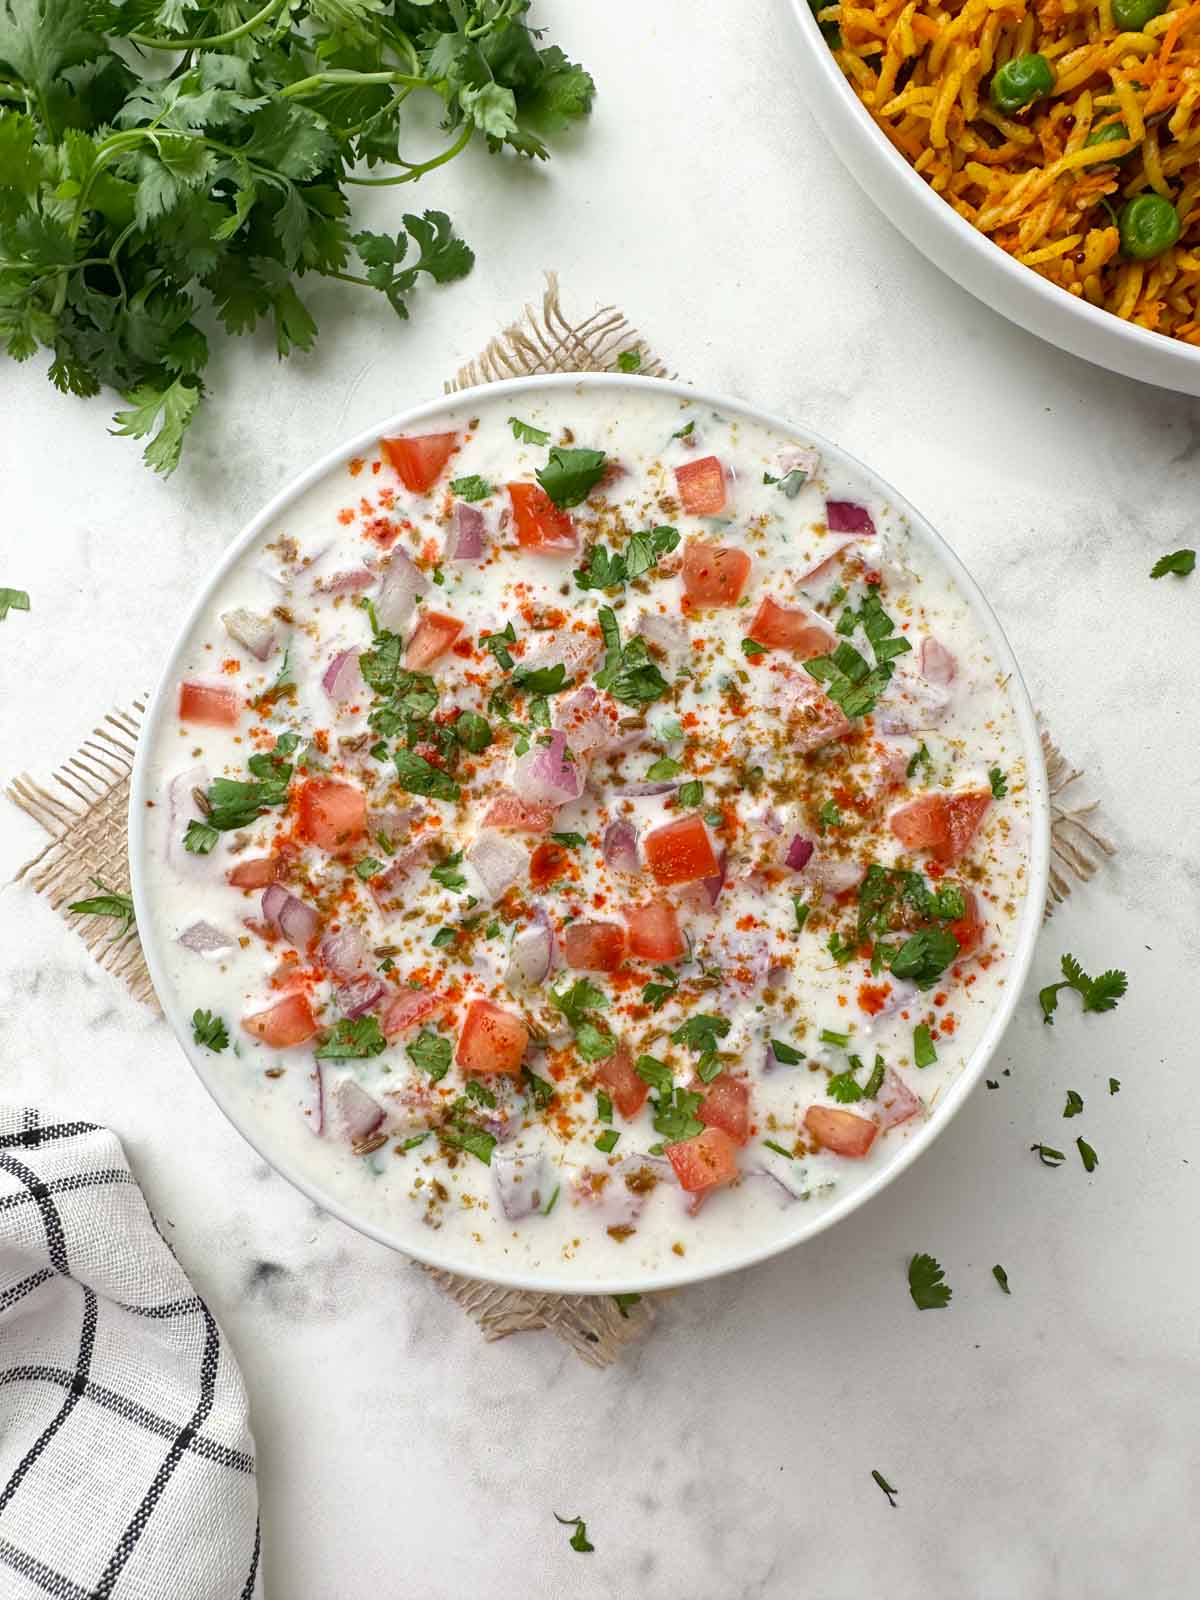 onion tomato raita served on a bowl garnished with roasted cumin powder, red chili powder with carrot rice and coriander bunch on the side